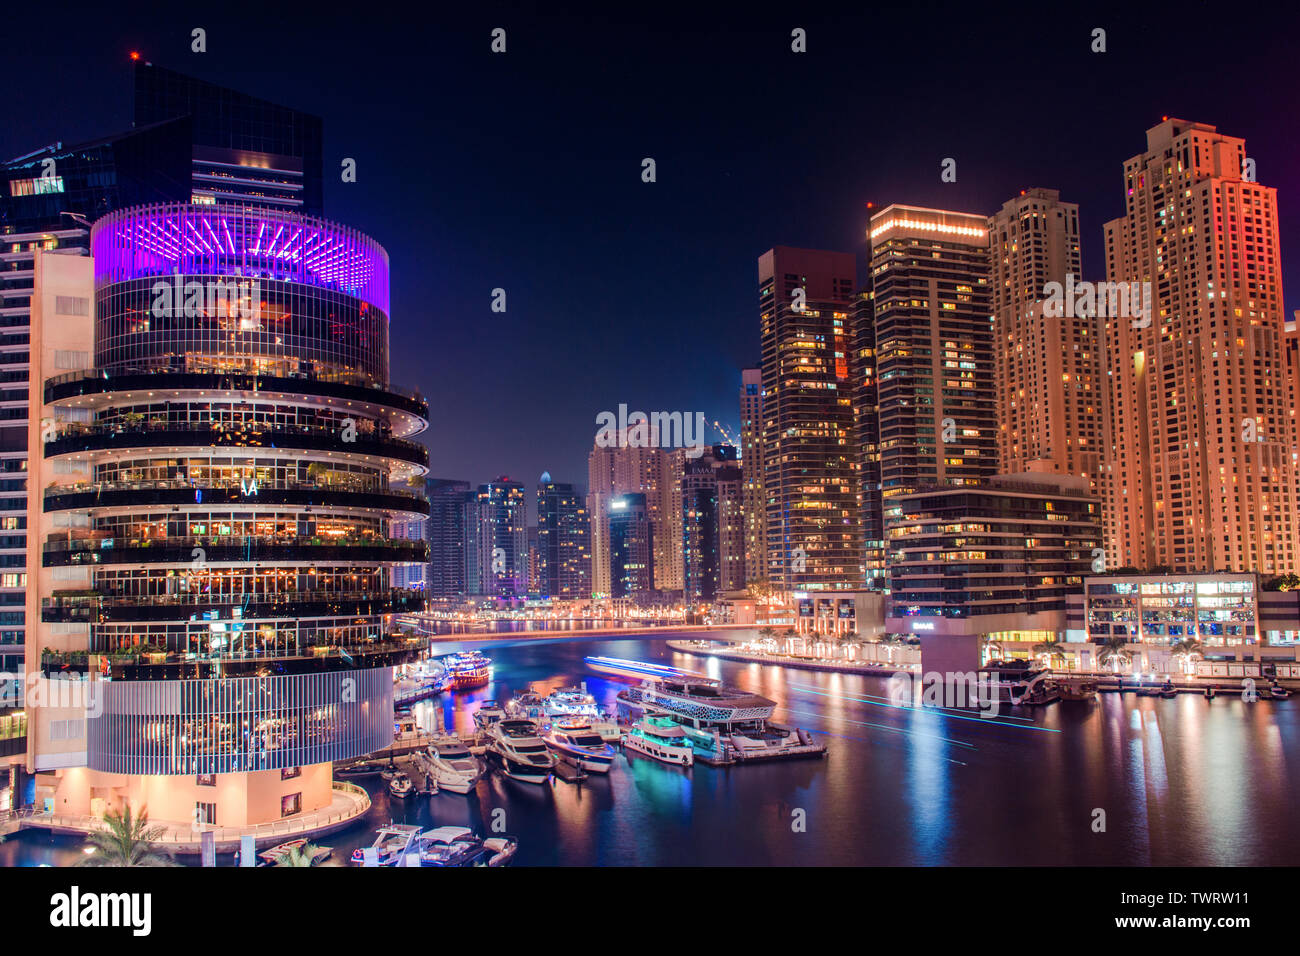 Colorful night City view of Dubai Marina modern buildings and lake boat yacht, Luxury life style amazing architecture best place to visit Stock Photo